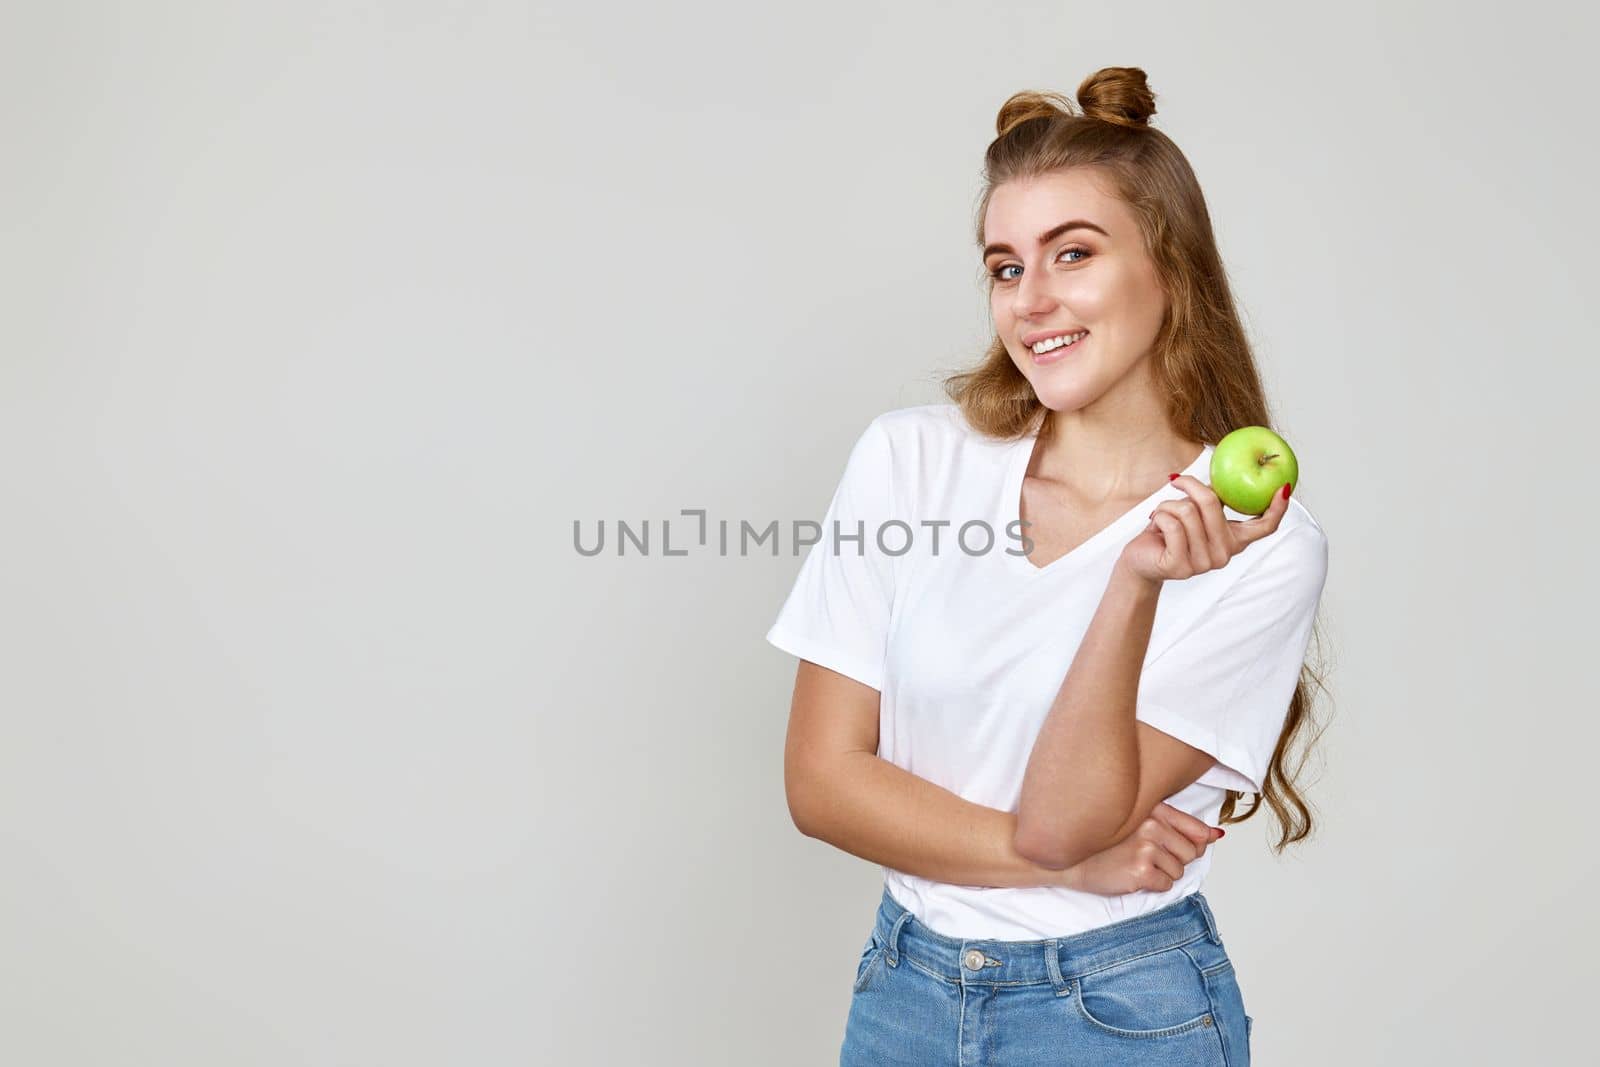 smiling pretty girl holding green apple isolated on studio background. copy space